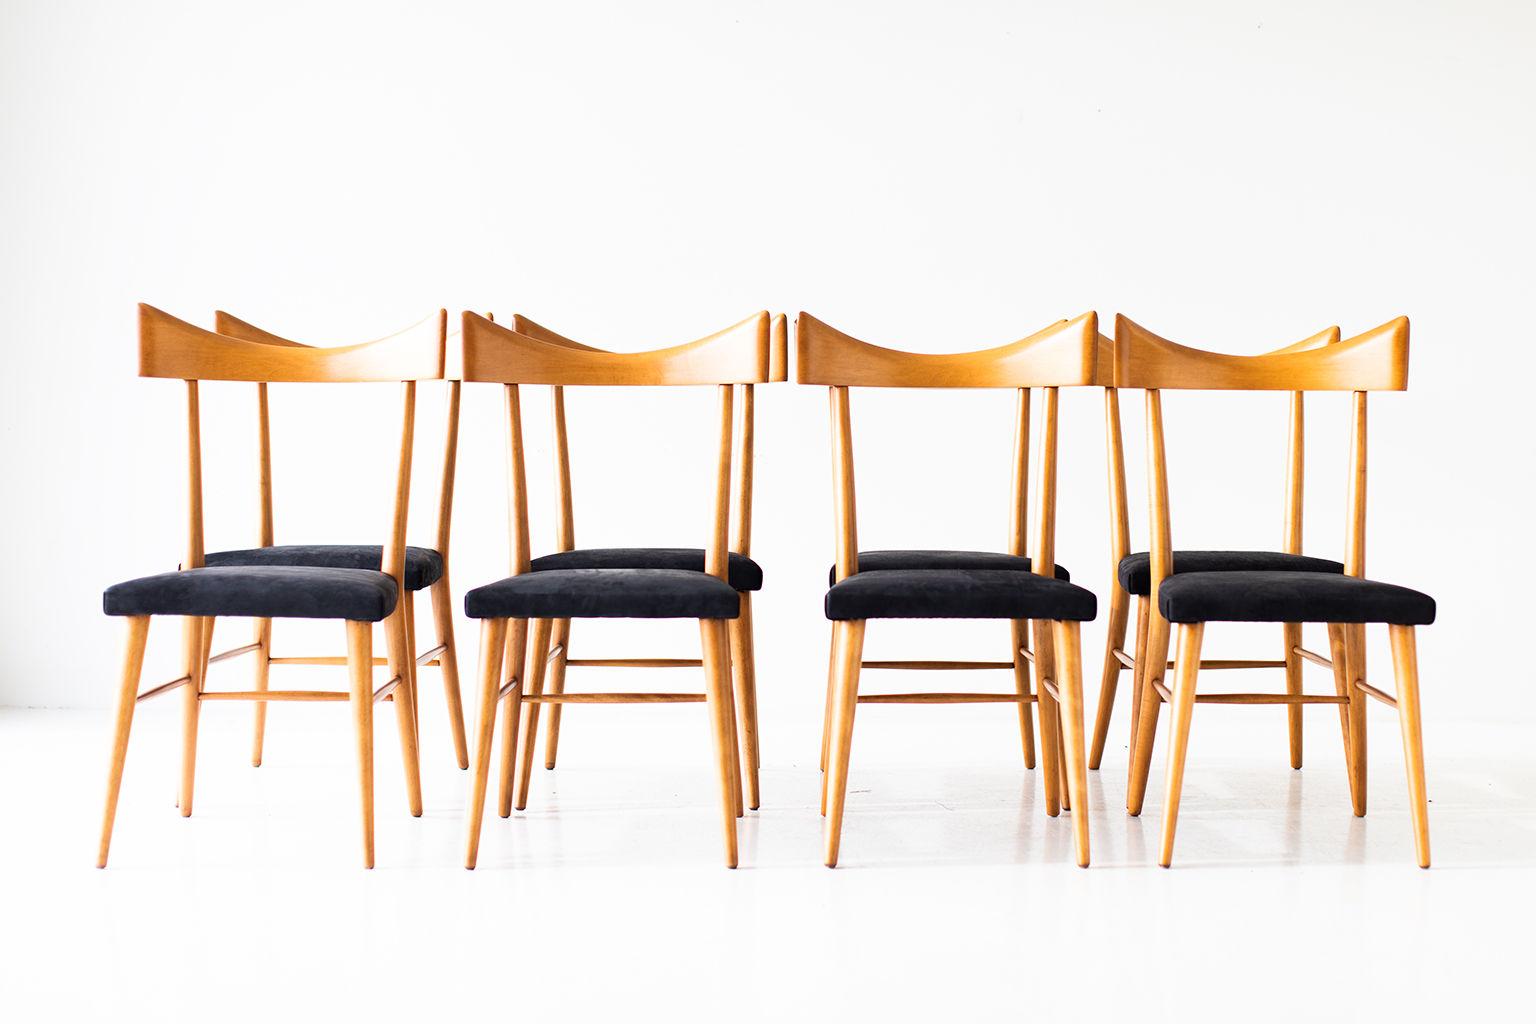 Designer: Paul McCobb.

Manufacturer: Winchendon Furniture.
Period/Model: Mid-Century Modern.
Specs: Maple, leather.

Condition:

These Paul McCobb Planner Group dining chairs for Winchendon Furniture are in excellent restored condition. The